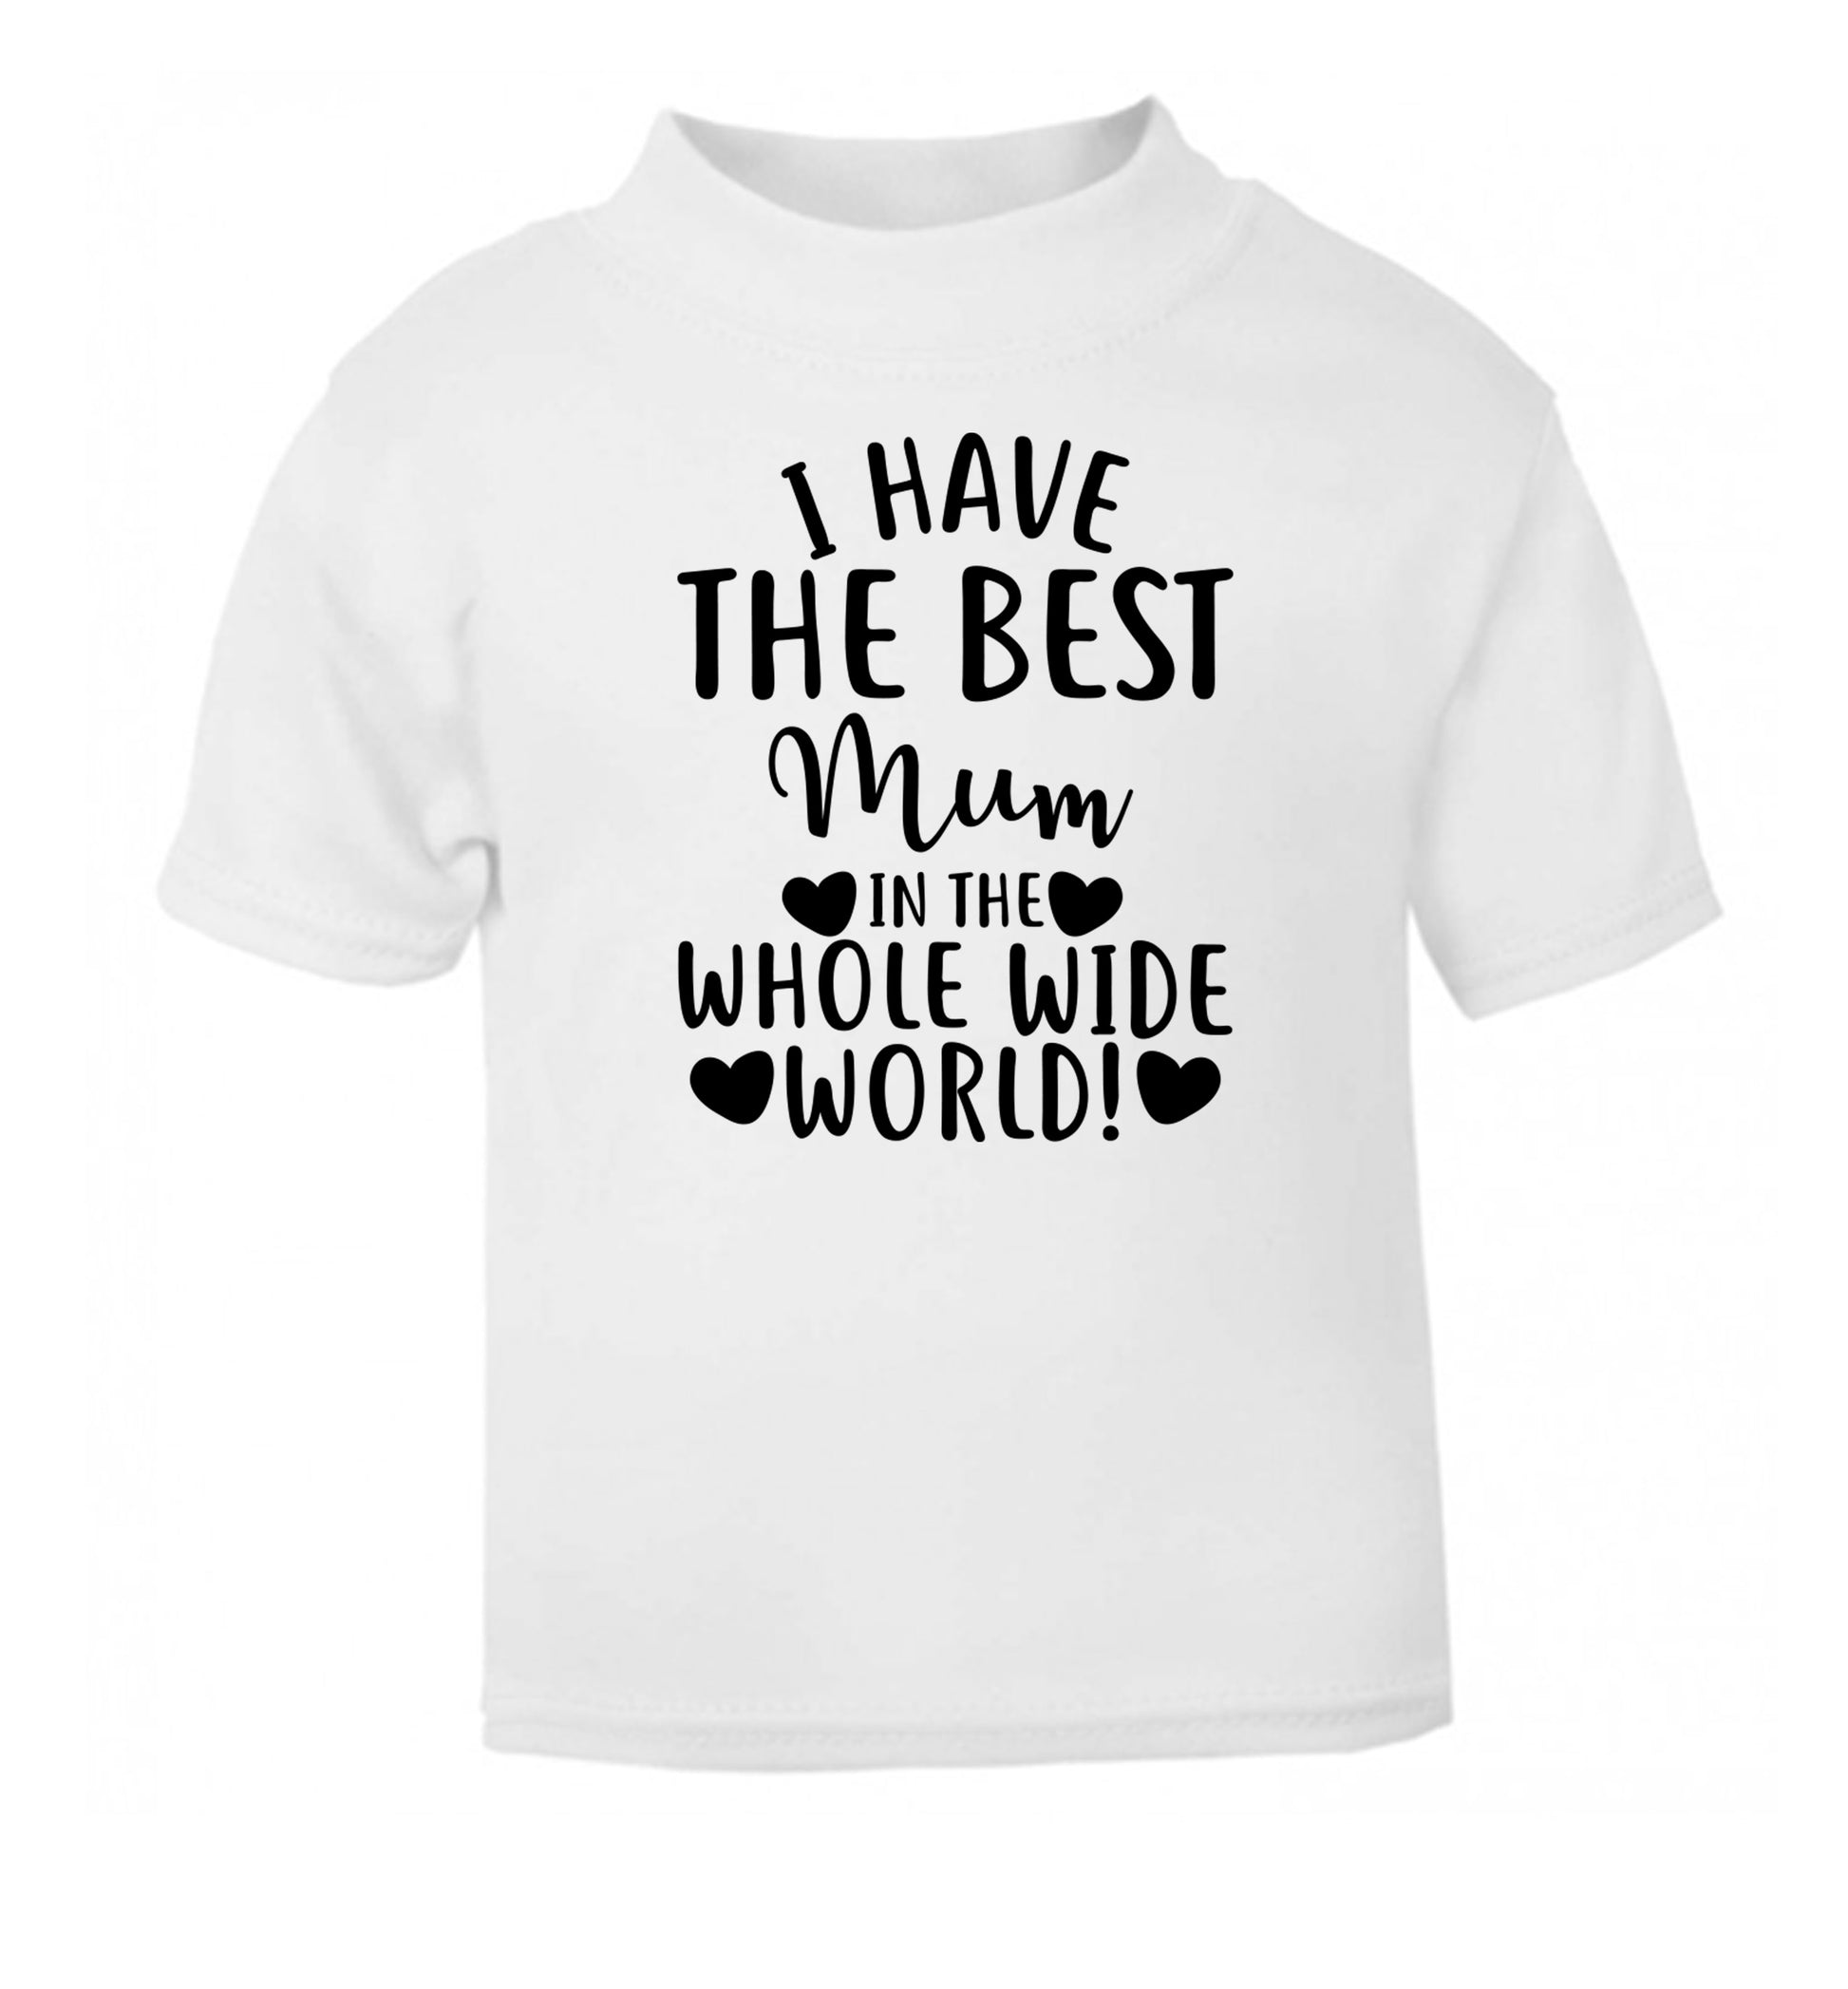 I have the best mum in the whole wide world! white Baby Toddler Tshirt 2 Years